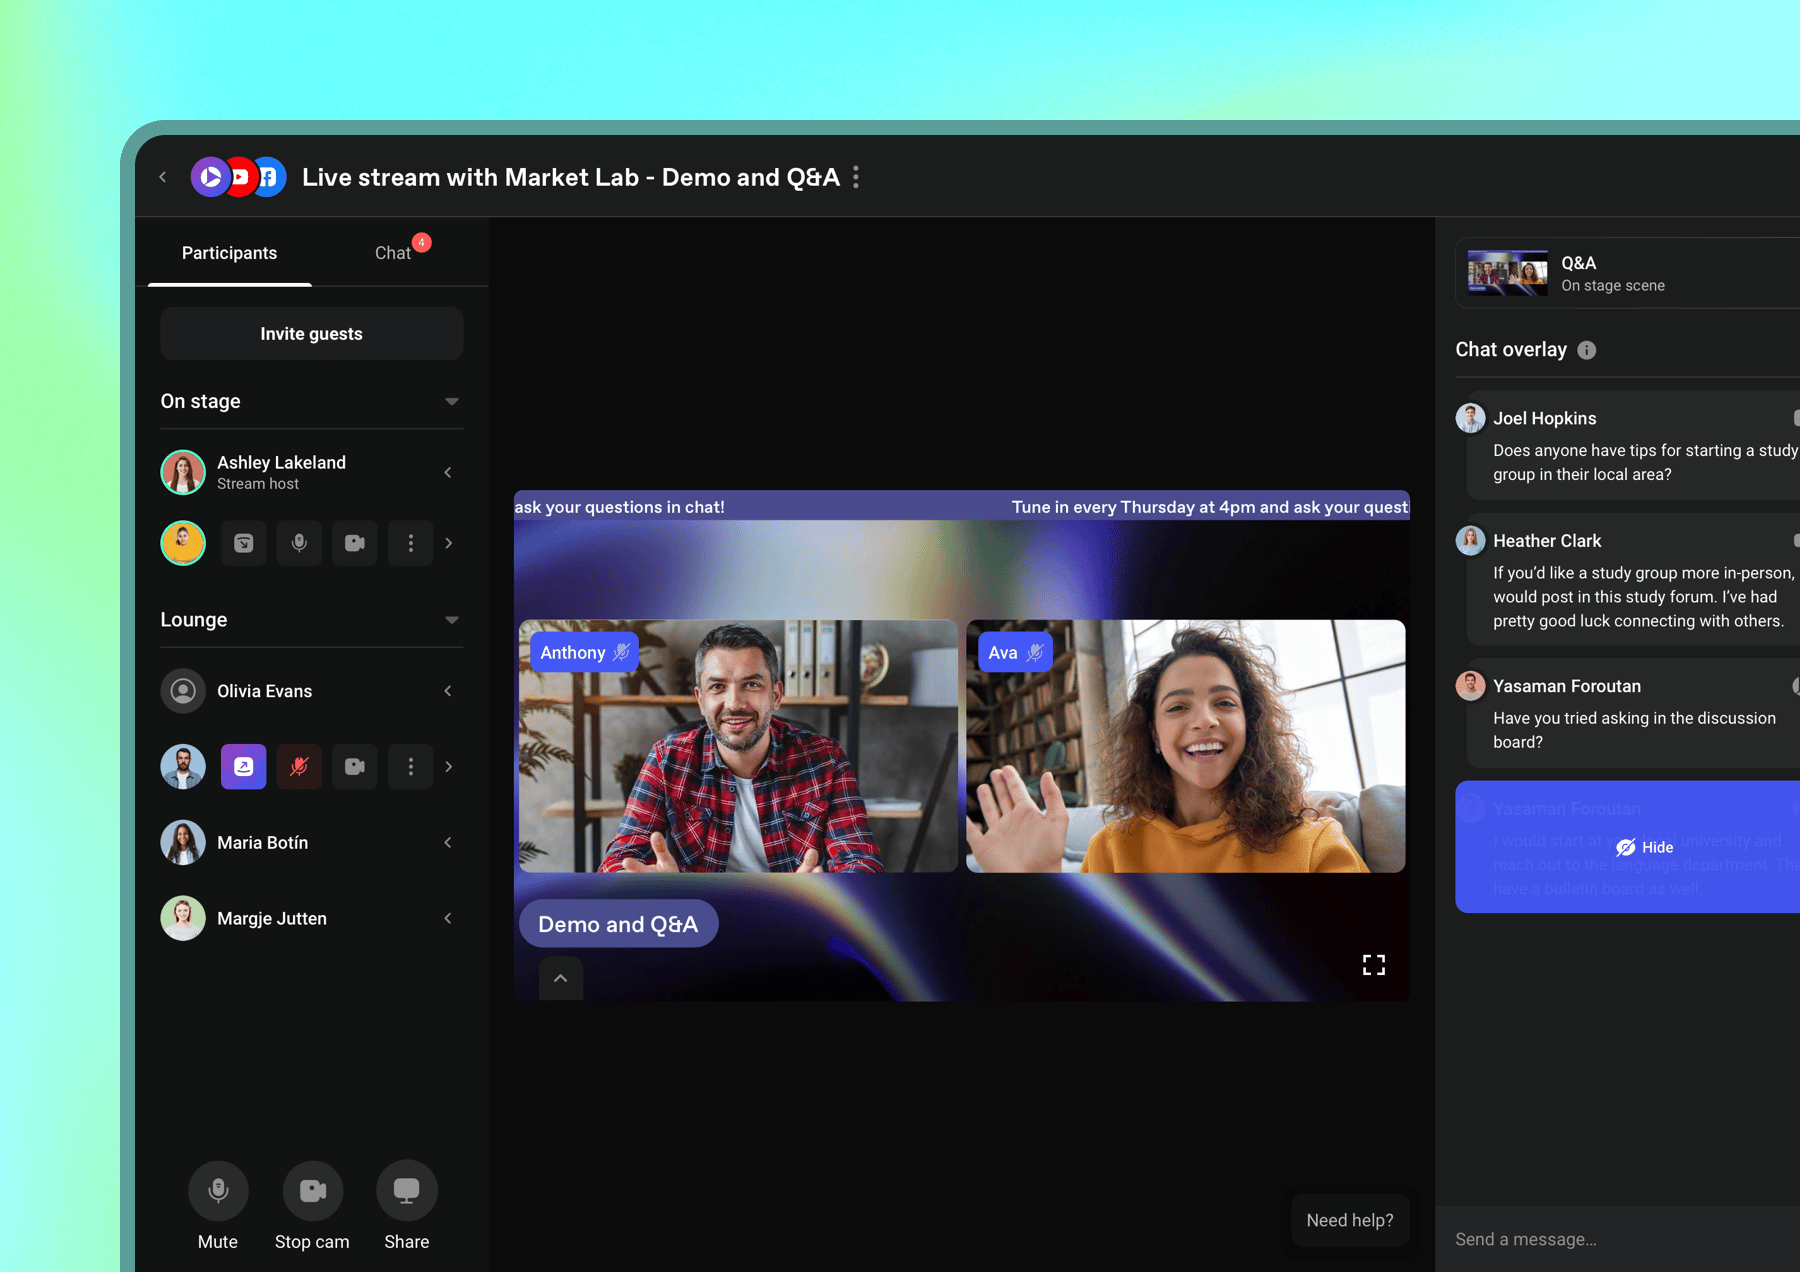 Live stream host managing participants and promoting audience chat messages to be on stream.